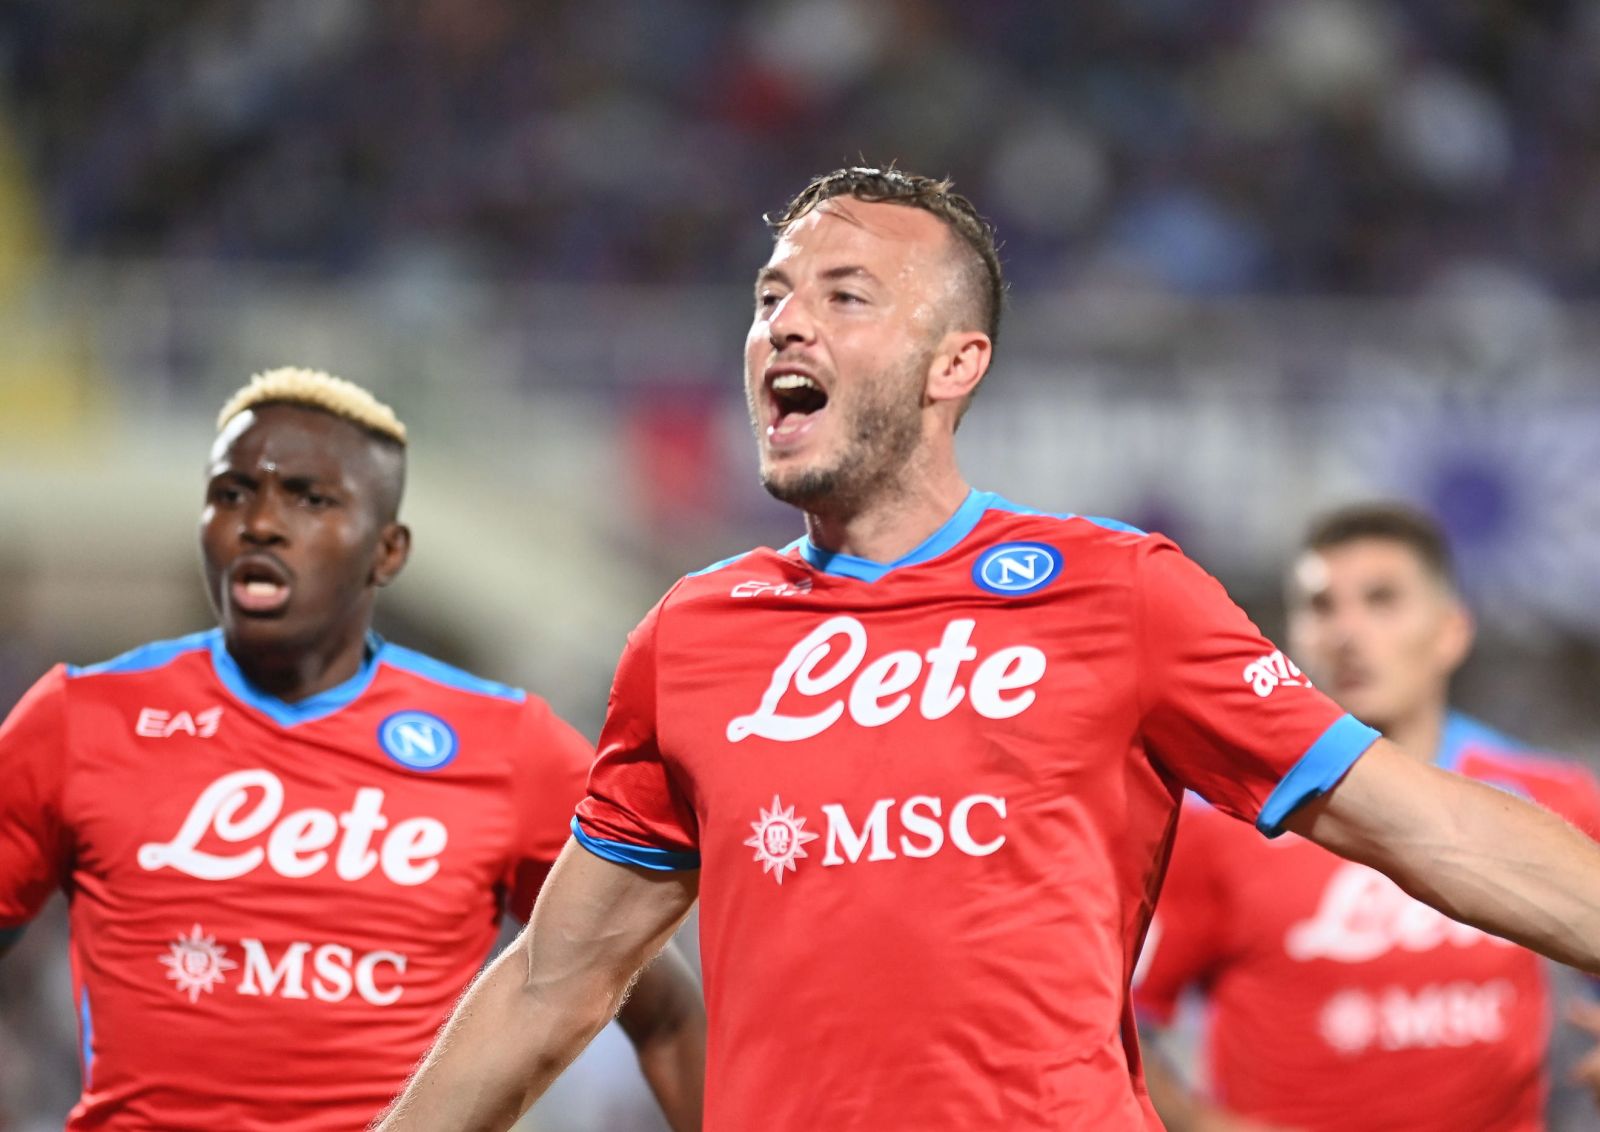 epa09504207 Napoli's defender Amir Rrahmani celebrates after scoring his team's second goal during the Italian Serie A soccer match between ACF Fiorentina and SSC Napoli at the Artemio Franchi stadium in Florence, Italy, 03 October 2021.  EPA/CLAUDIO GIOVANNINI